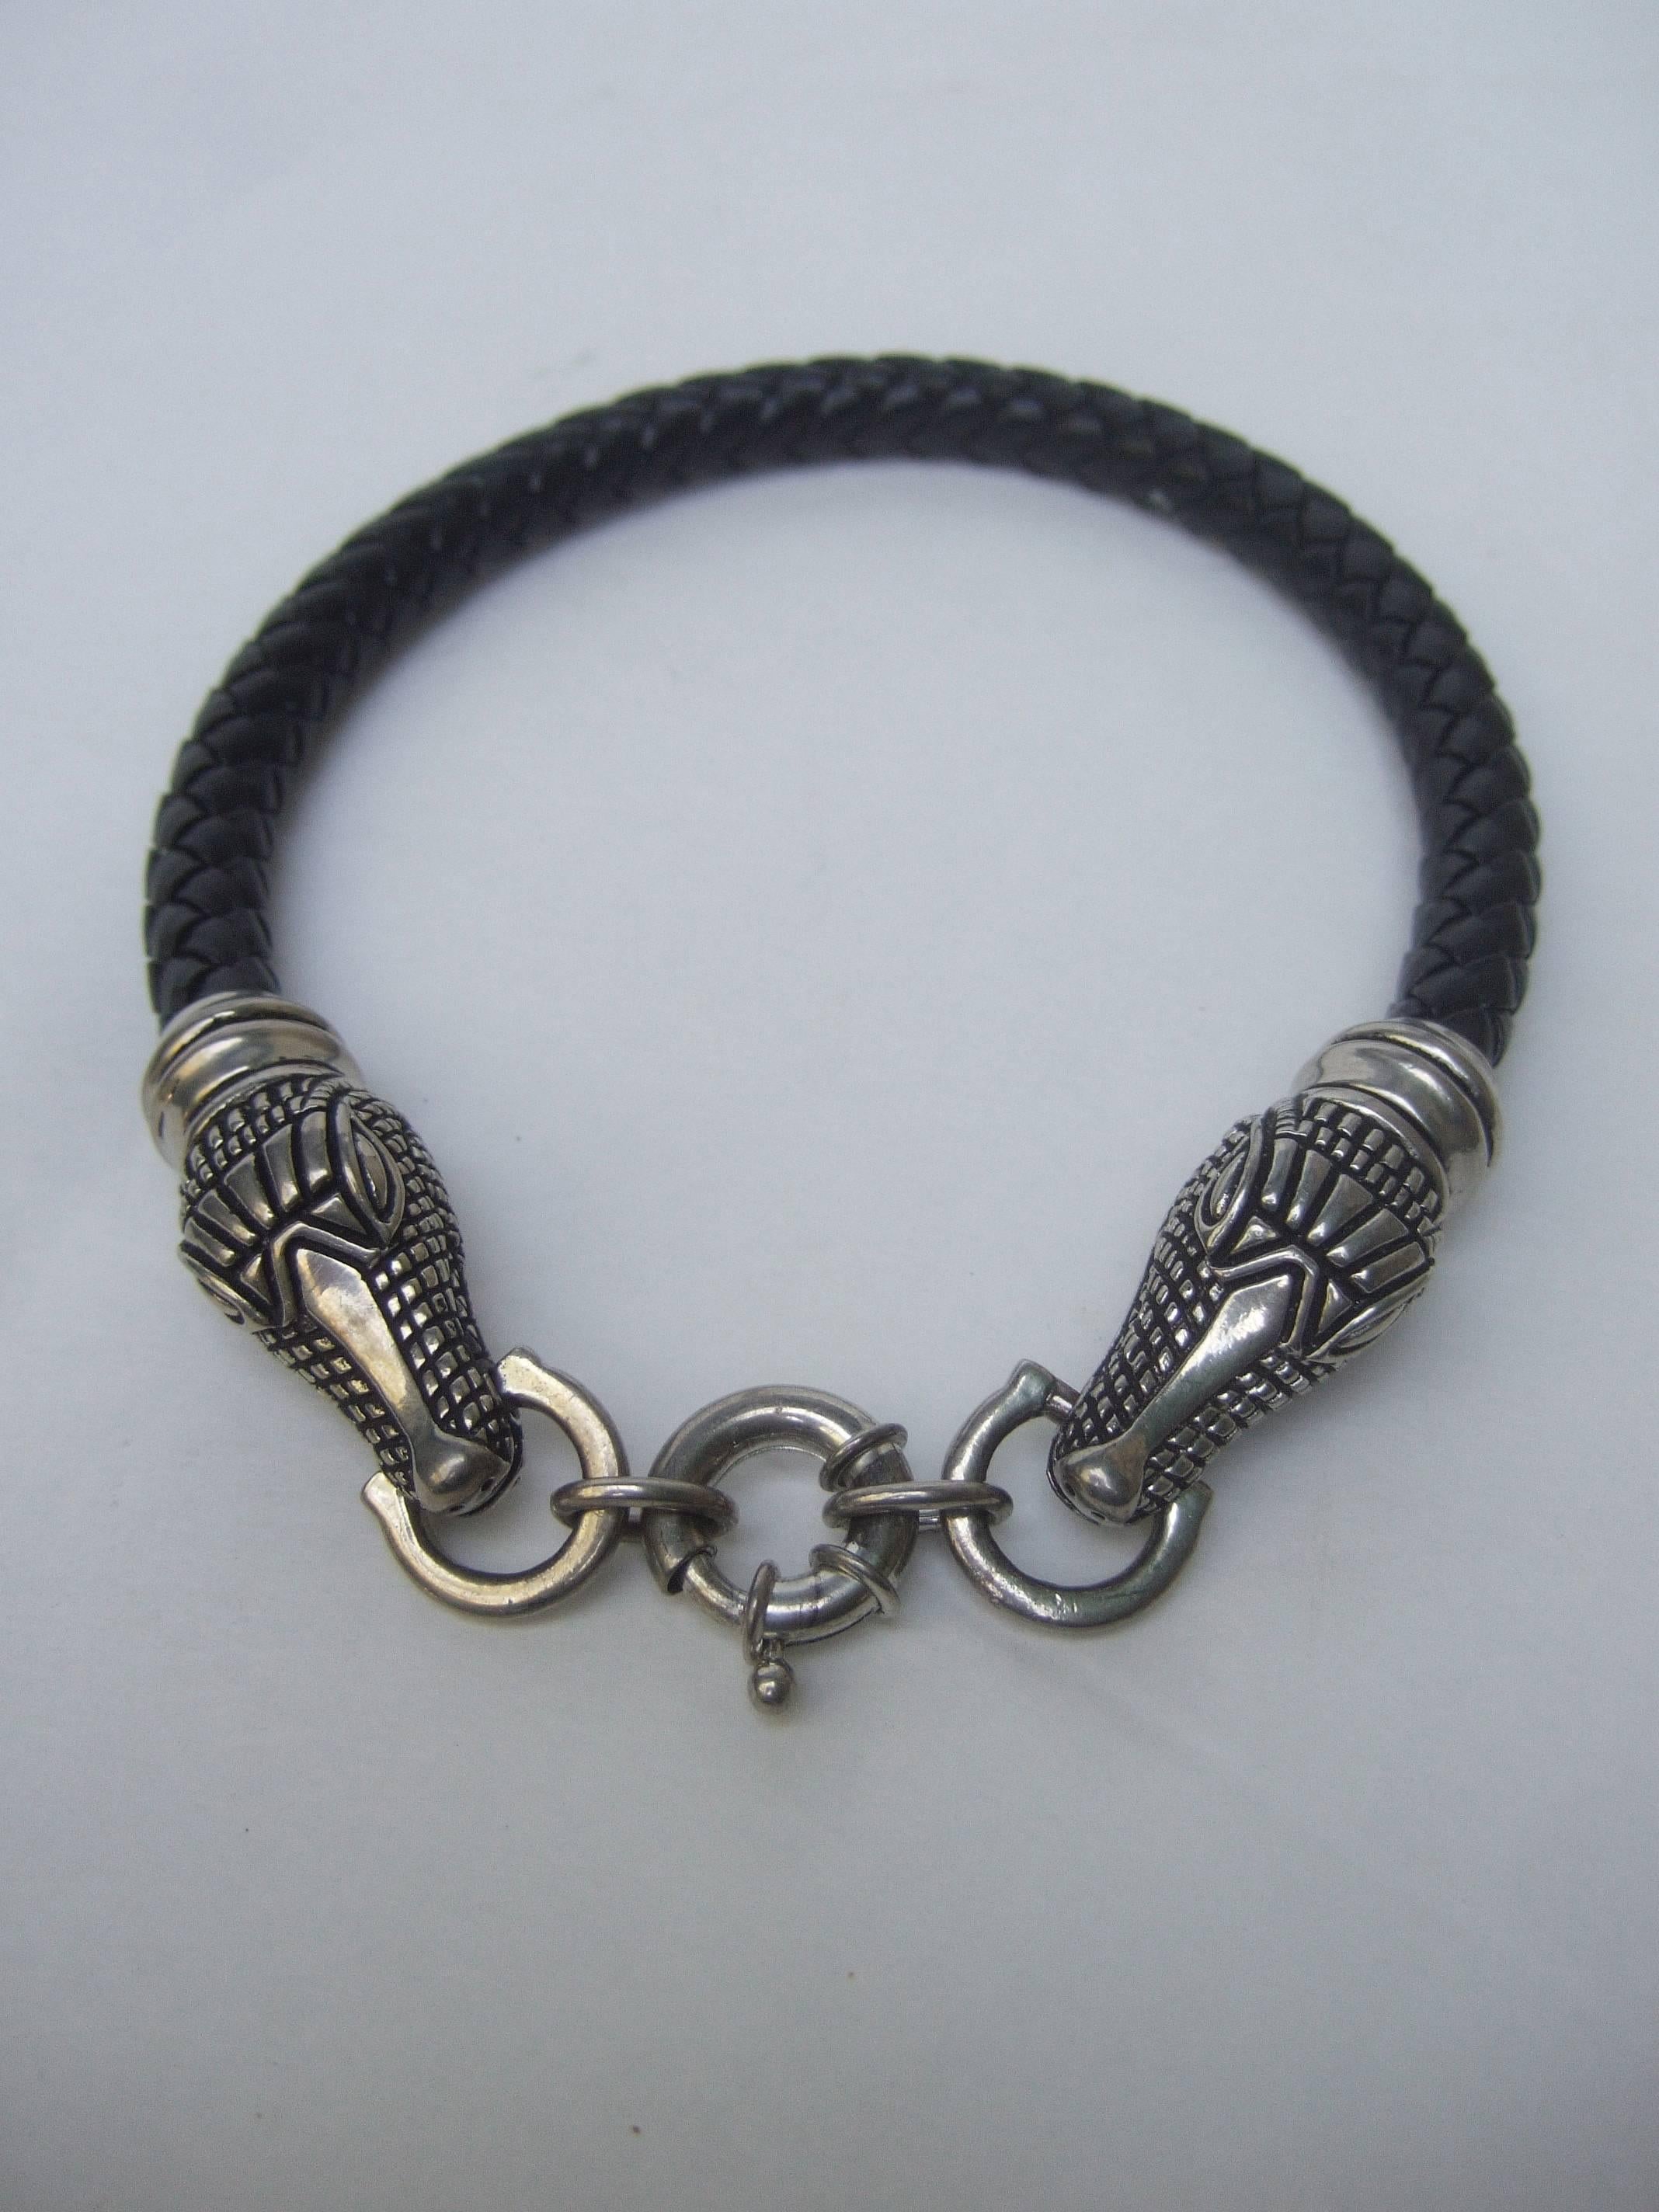 Sleek Braided Leather Alligator Head Choker Necklace In Excellent Condition For Sale In University City, MO